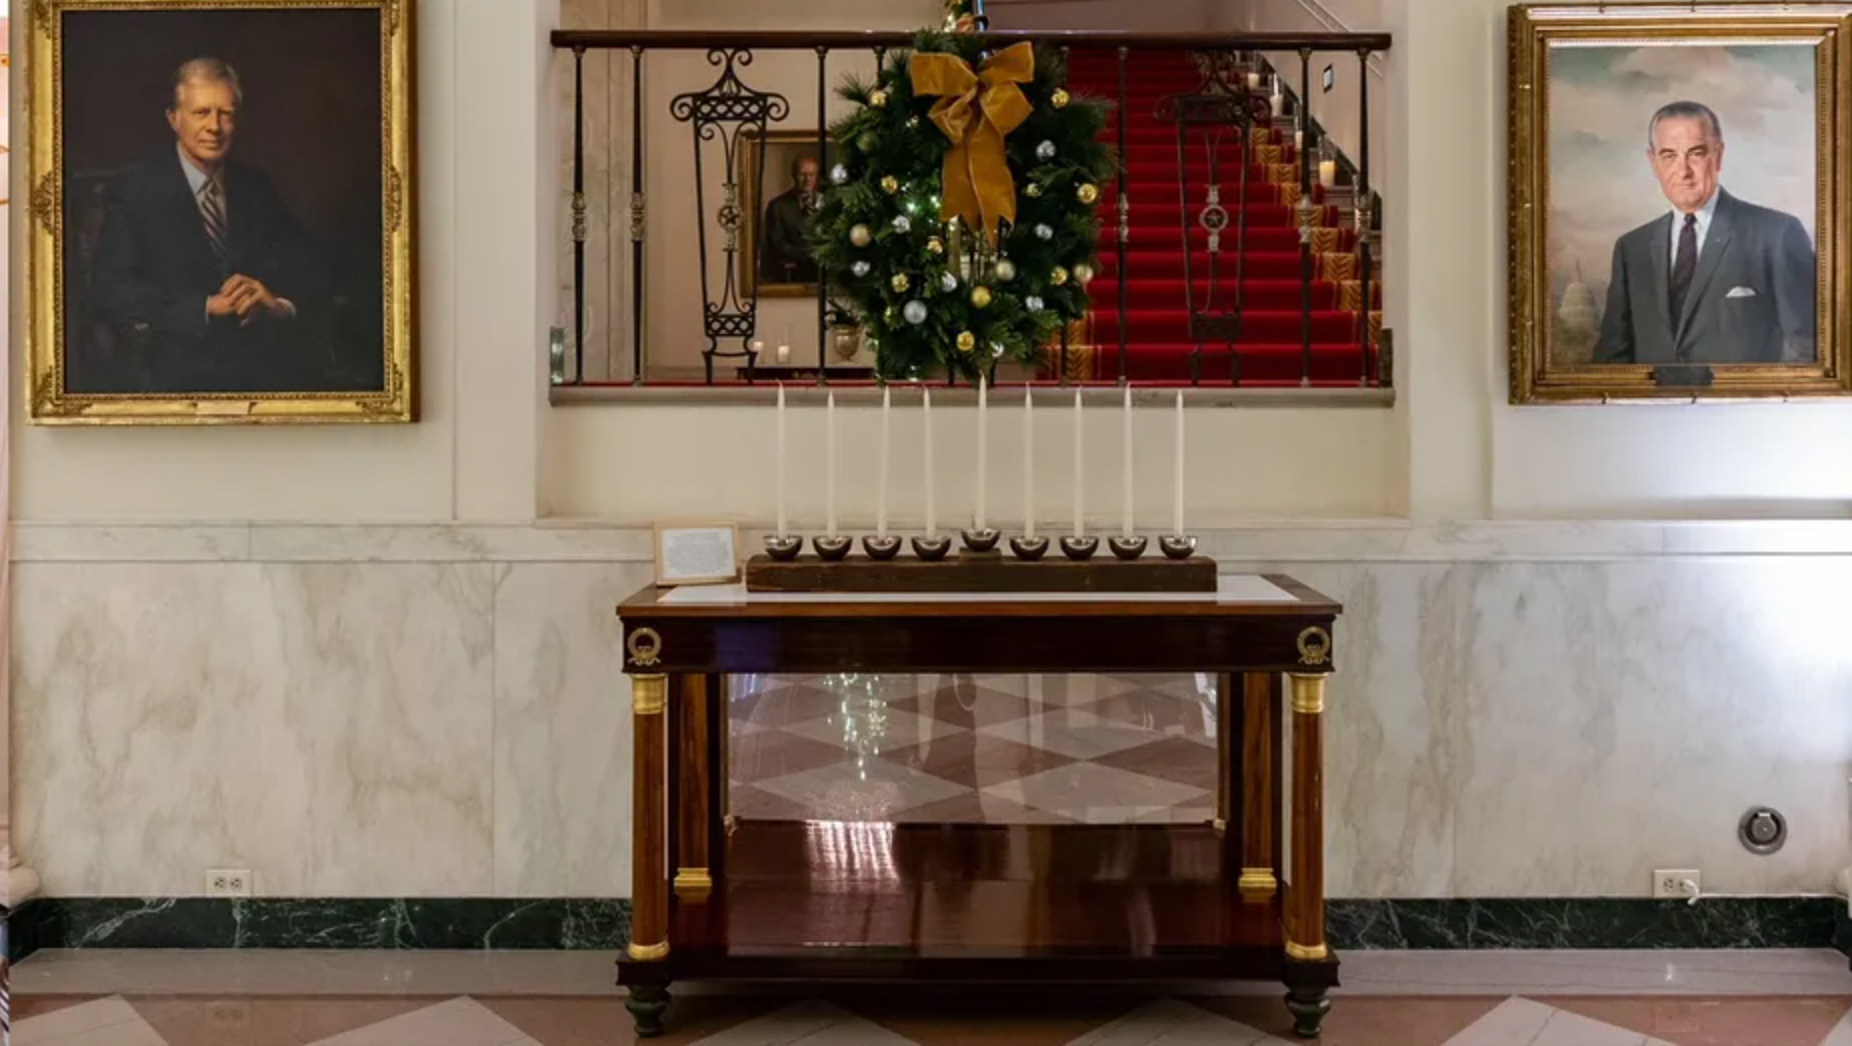 Menorah created by the Executive Residence Carpentry Shop from wood removed from the White House in the 1950s, as featured in the 2022 White House Holiday Decor.  